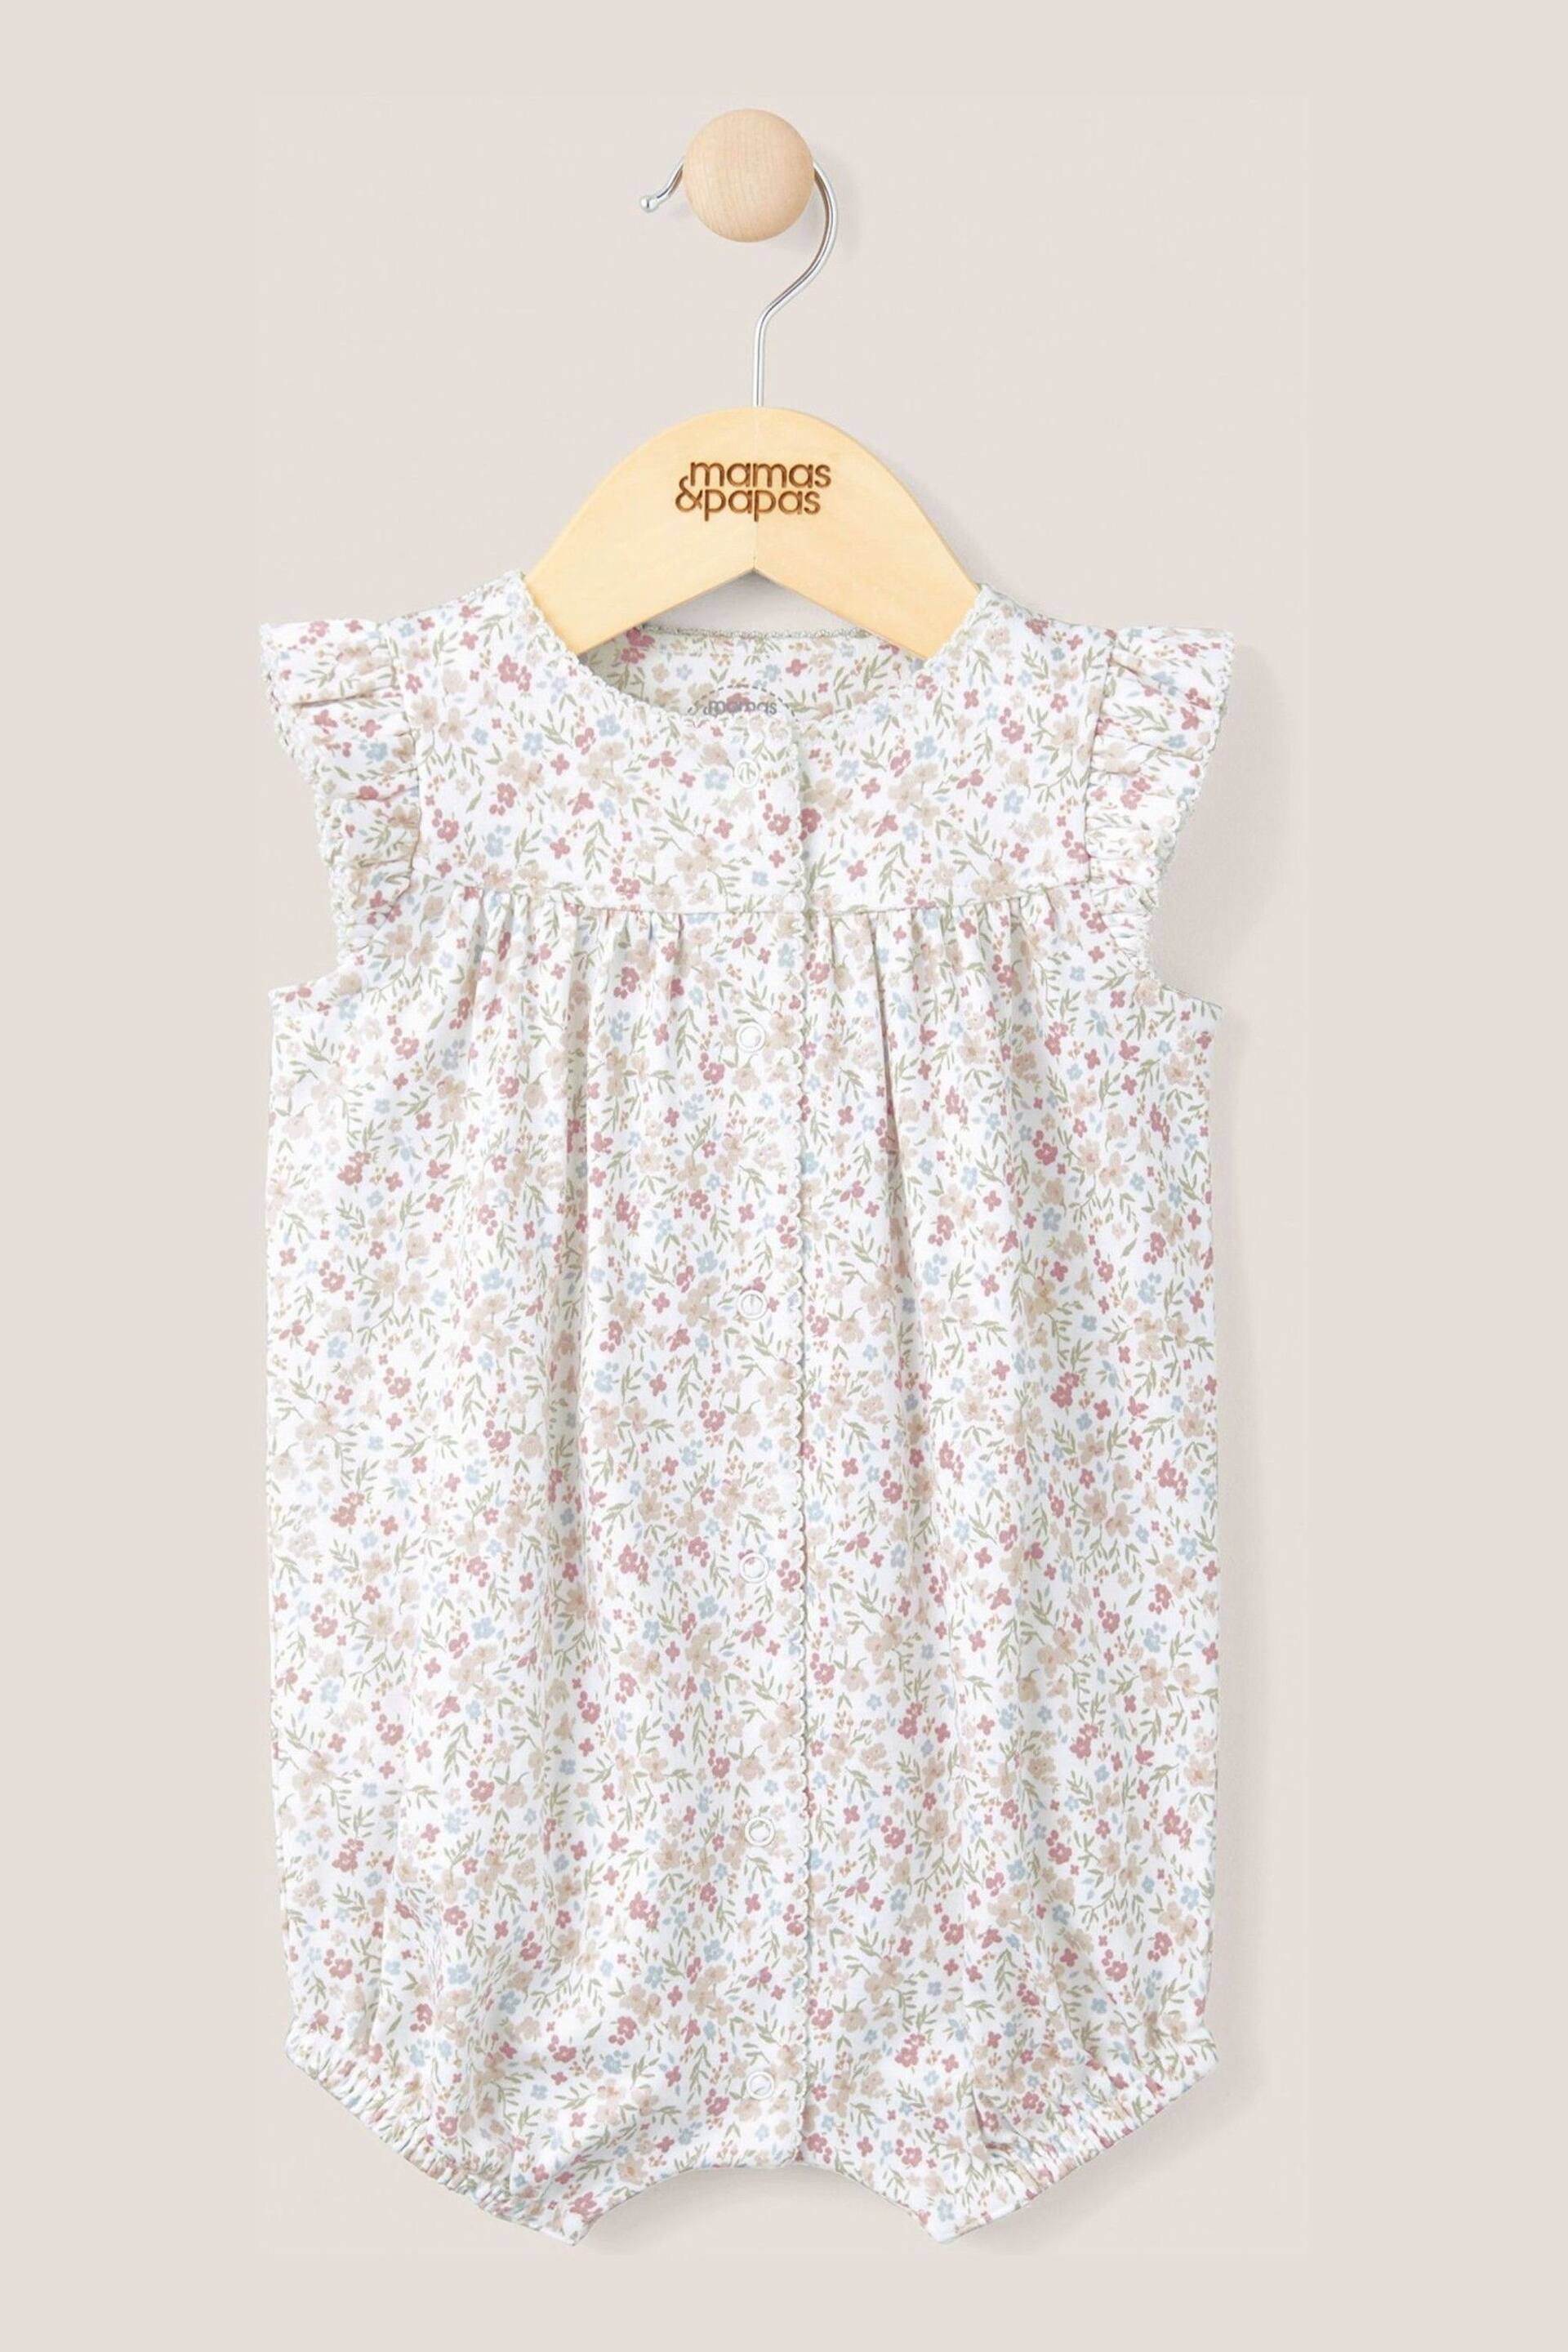 Mamas & Papas Pink Ditsy Floral Jersey Shortie Romper - Image 1 of 3